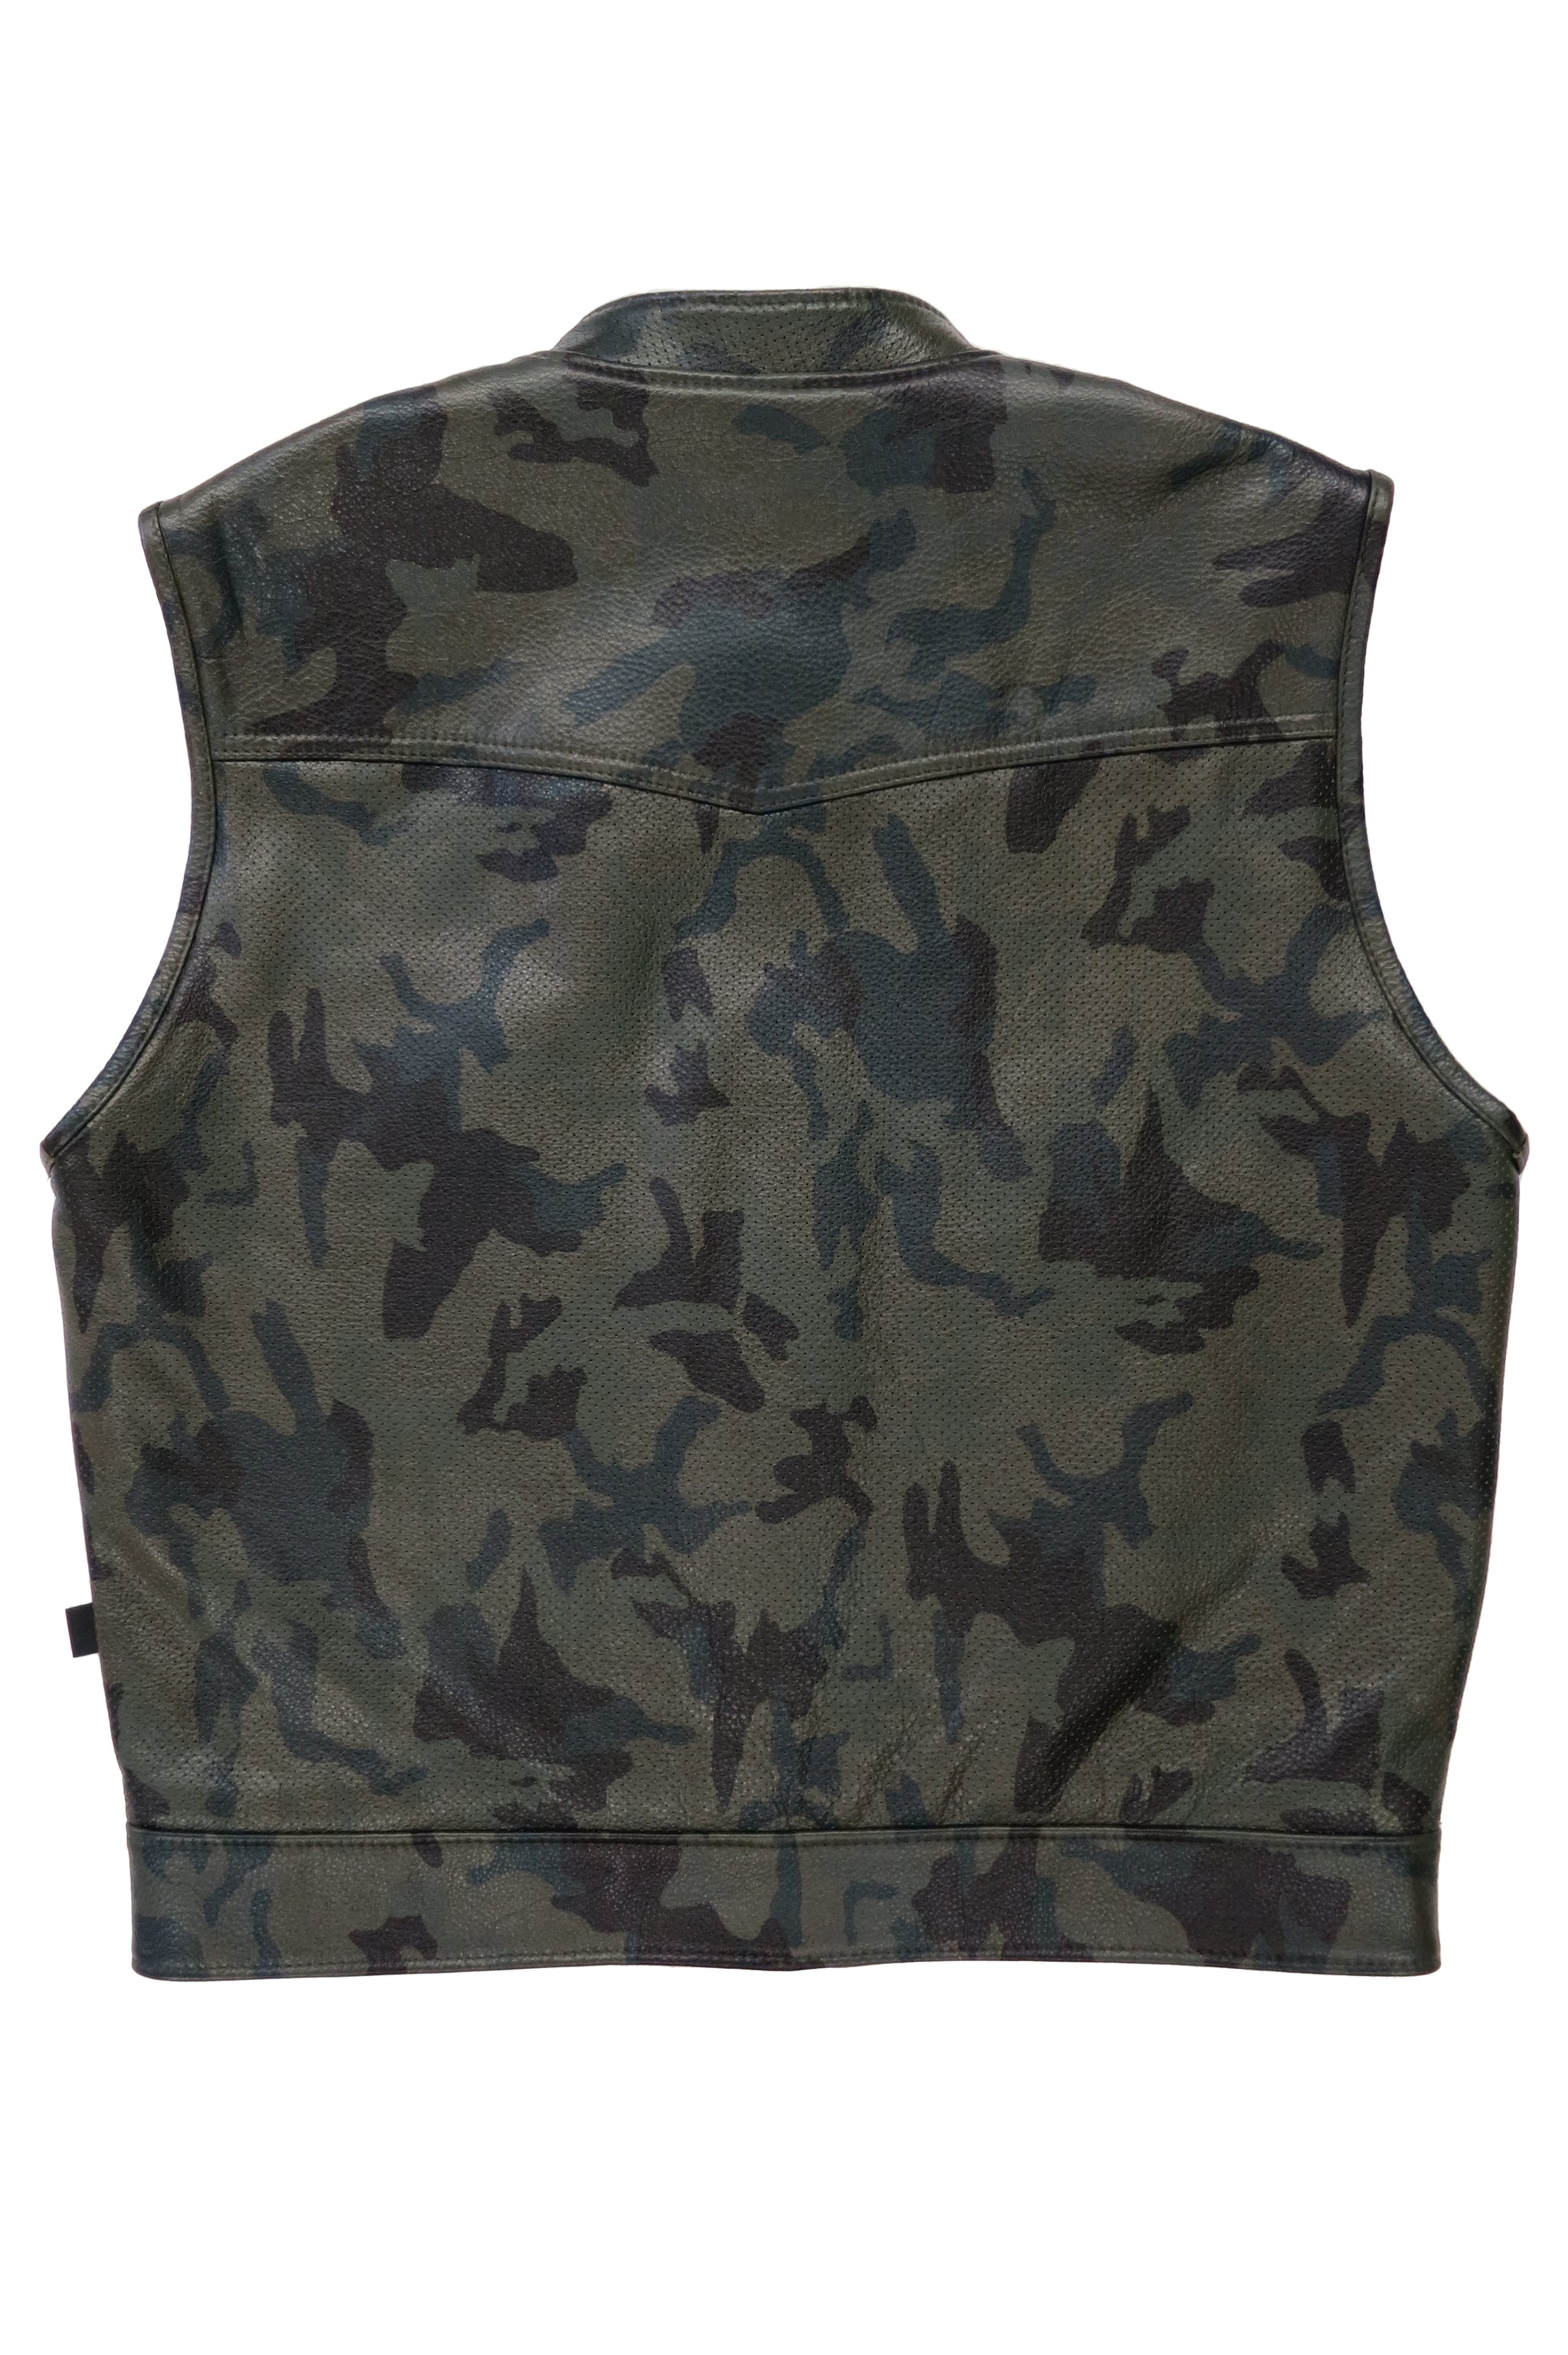 415 Leather Perforated Camouflage Zipper Vest - 415 Clothing, Inc.